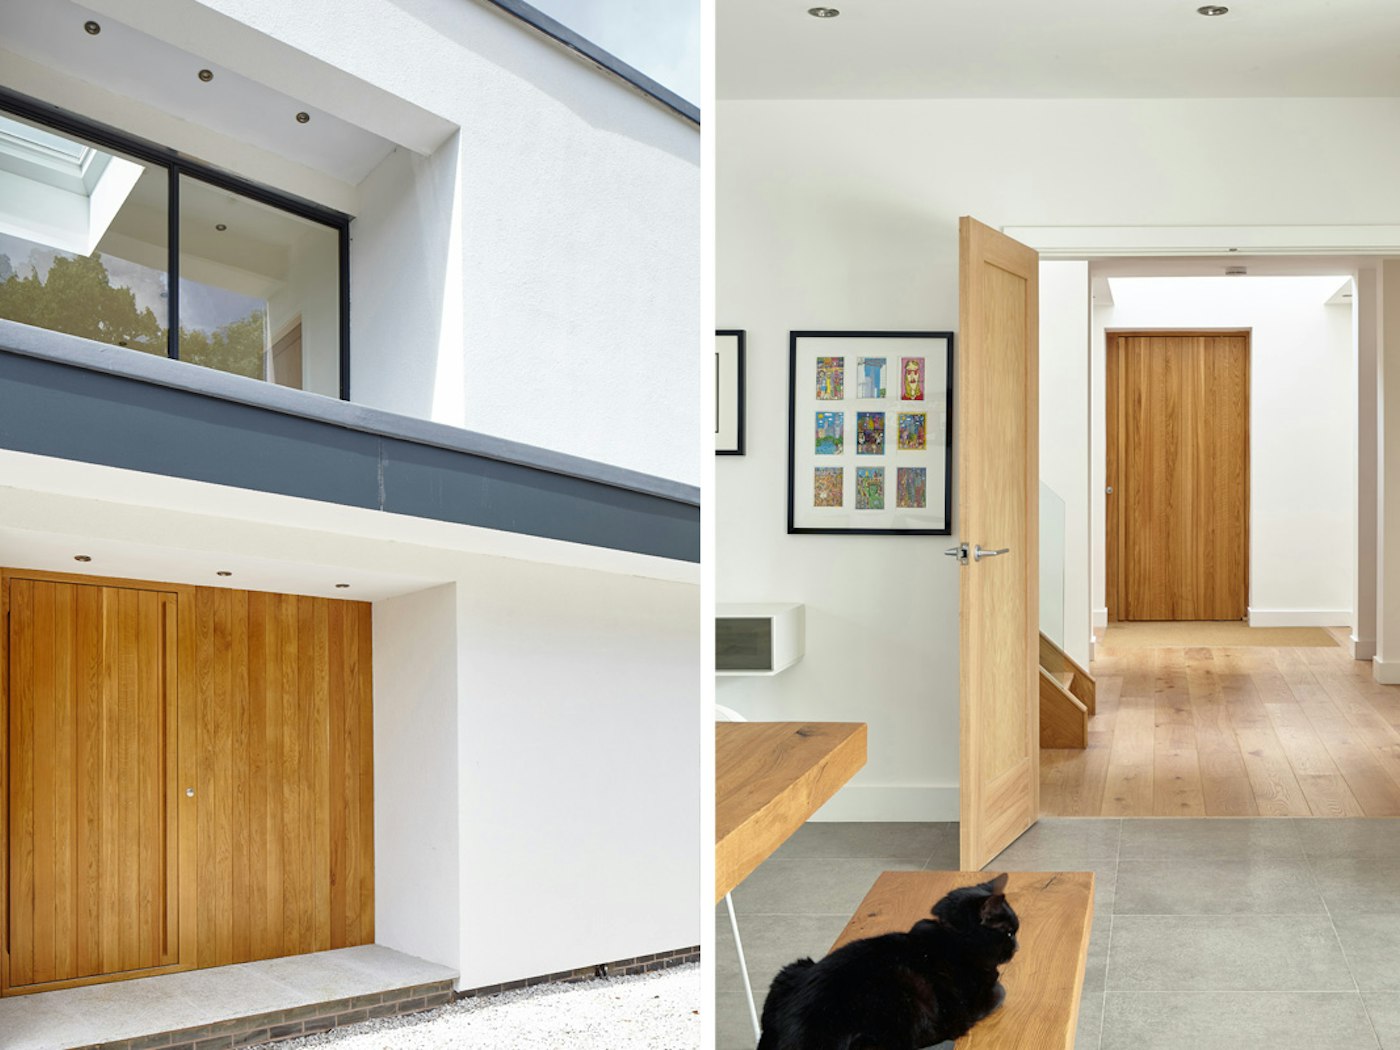 The simple colour scheme of this white rendered house allows for a theme of natural oak hardwood from the front door and throughout the interior